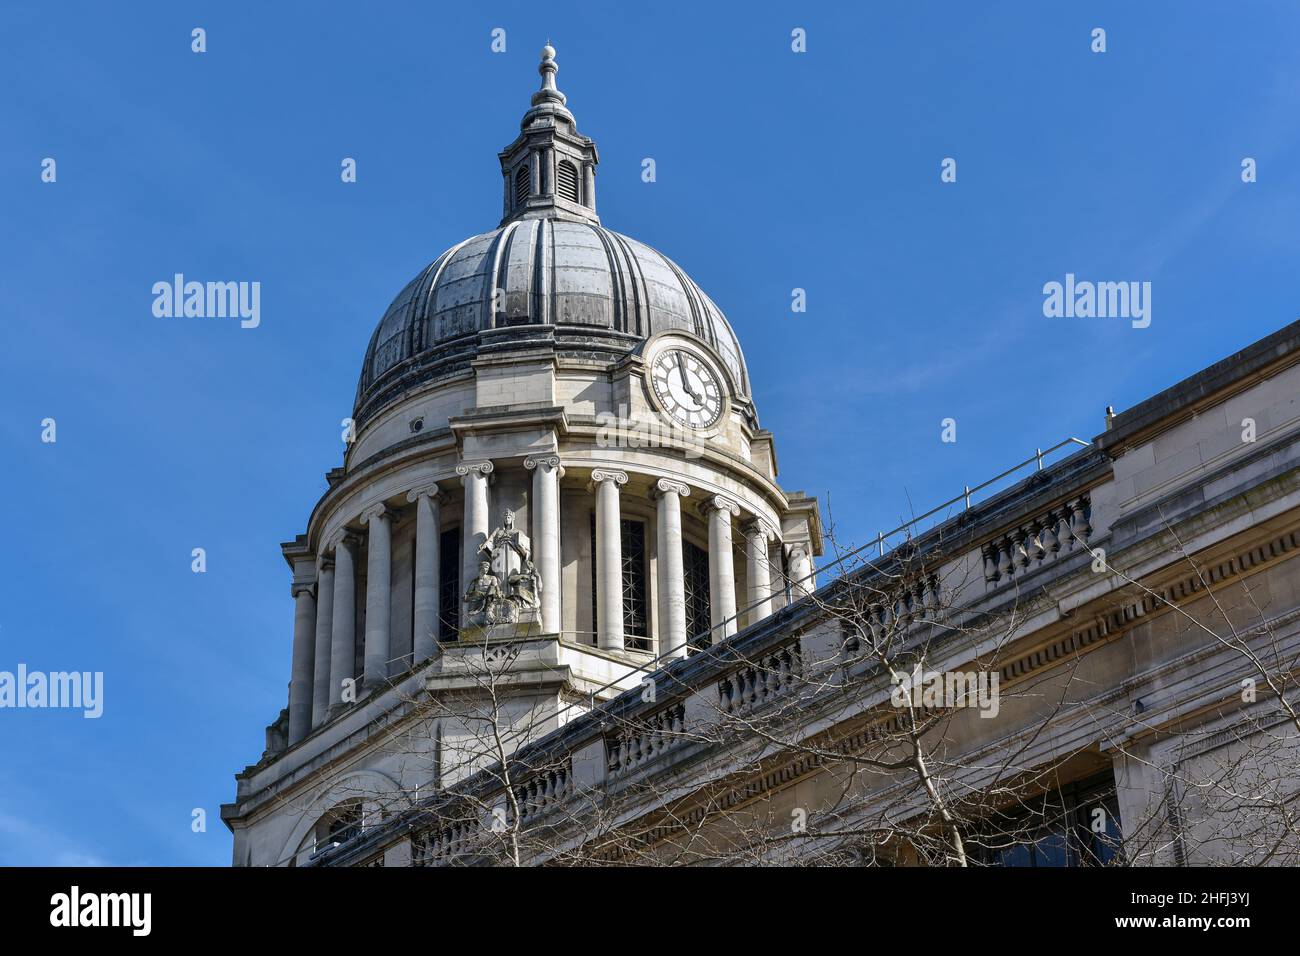 View of the dome of Nottingham City Council House located in the heart of Nottingham city in the East Midlands, England. Stock Photo